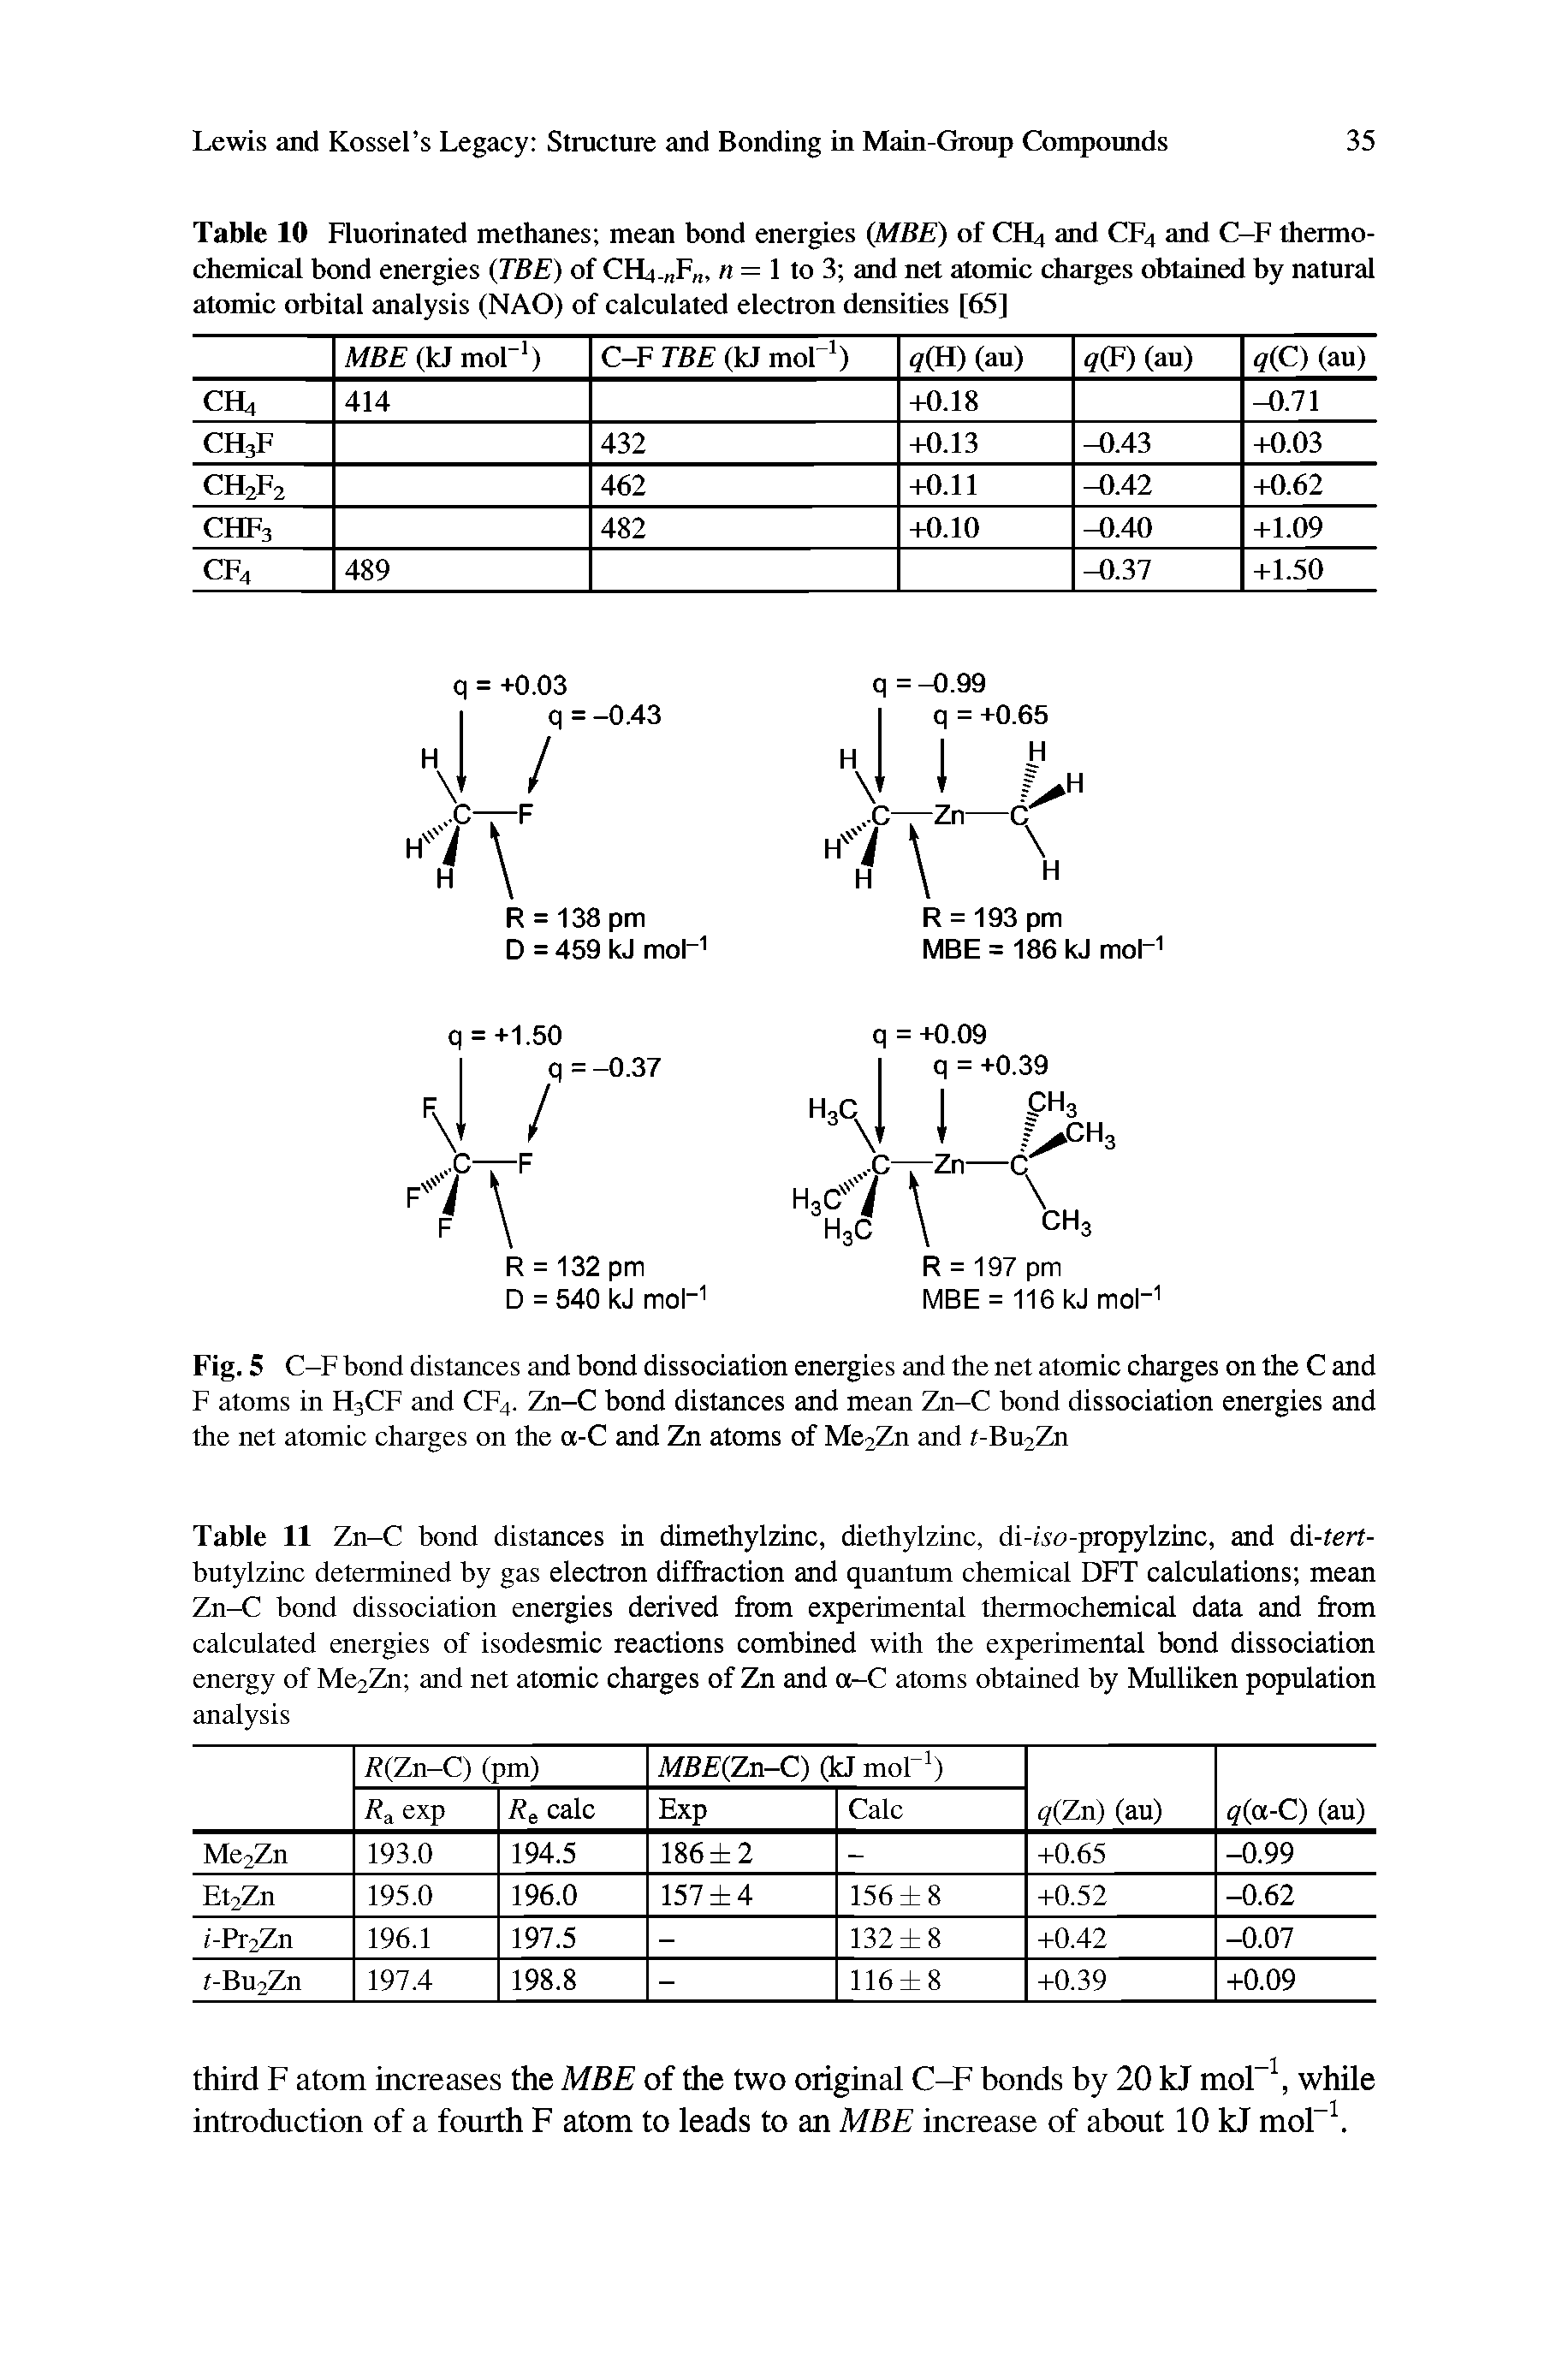 Table 11 Zn-C bond distances in dimethylzinc, diethylzinc, di-iso-propylzinc, and di-tert-butylzinc determined by gas electron diffraction and quantum chemical DFT calculations mean Zn-C bond dissociation energies derived from experimental thermochemical data and from calculated energies of isodesmic reactions combined with the experimental bond dissociation energy of Mc2Zn and net atomic charges of Zn and a-C atoms obtained by Mulliken population analysis...